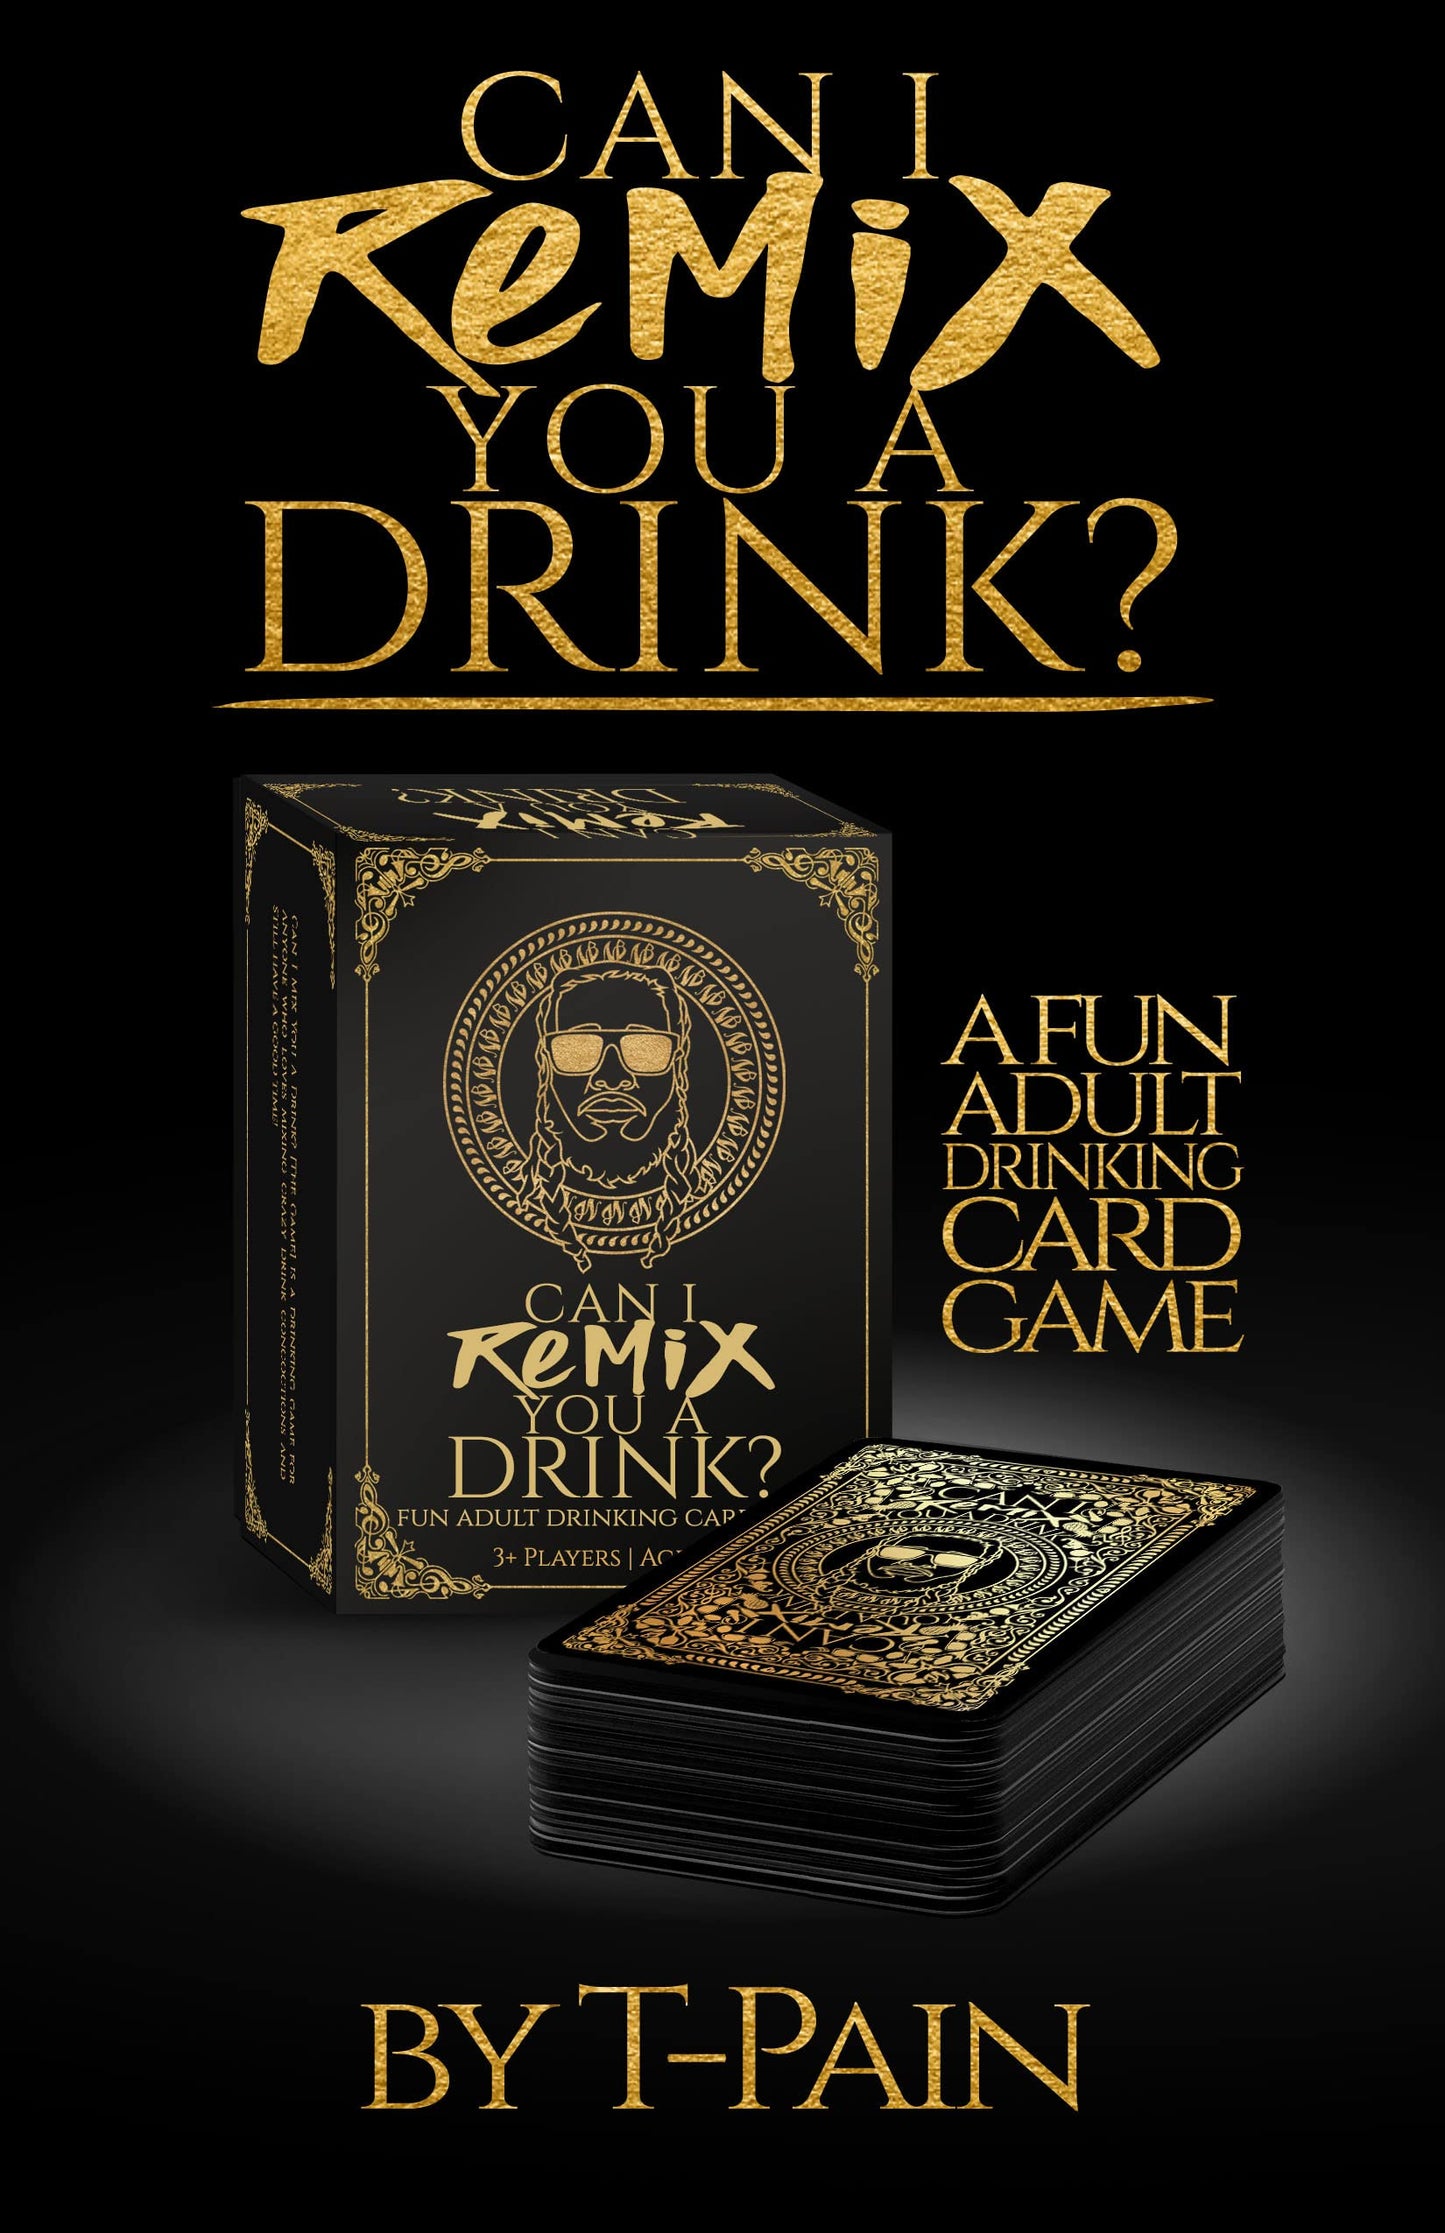 Can I Remix You a Drink? // A Fun Adult Drinking Card Game (Can I Mix You a Drink?)